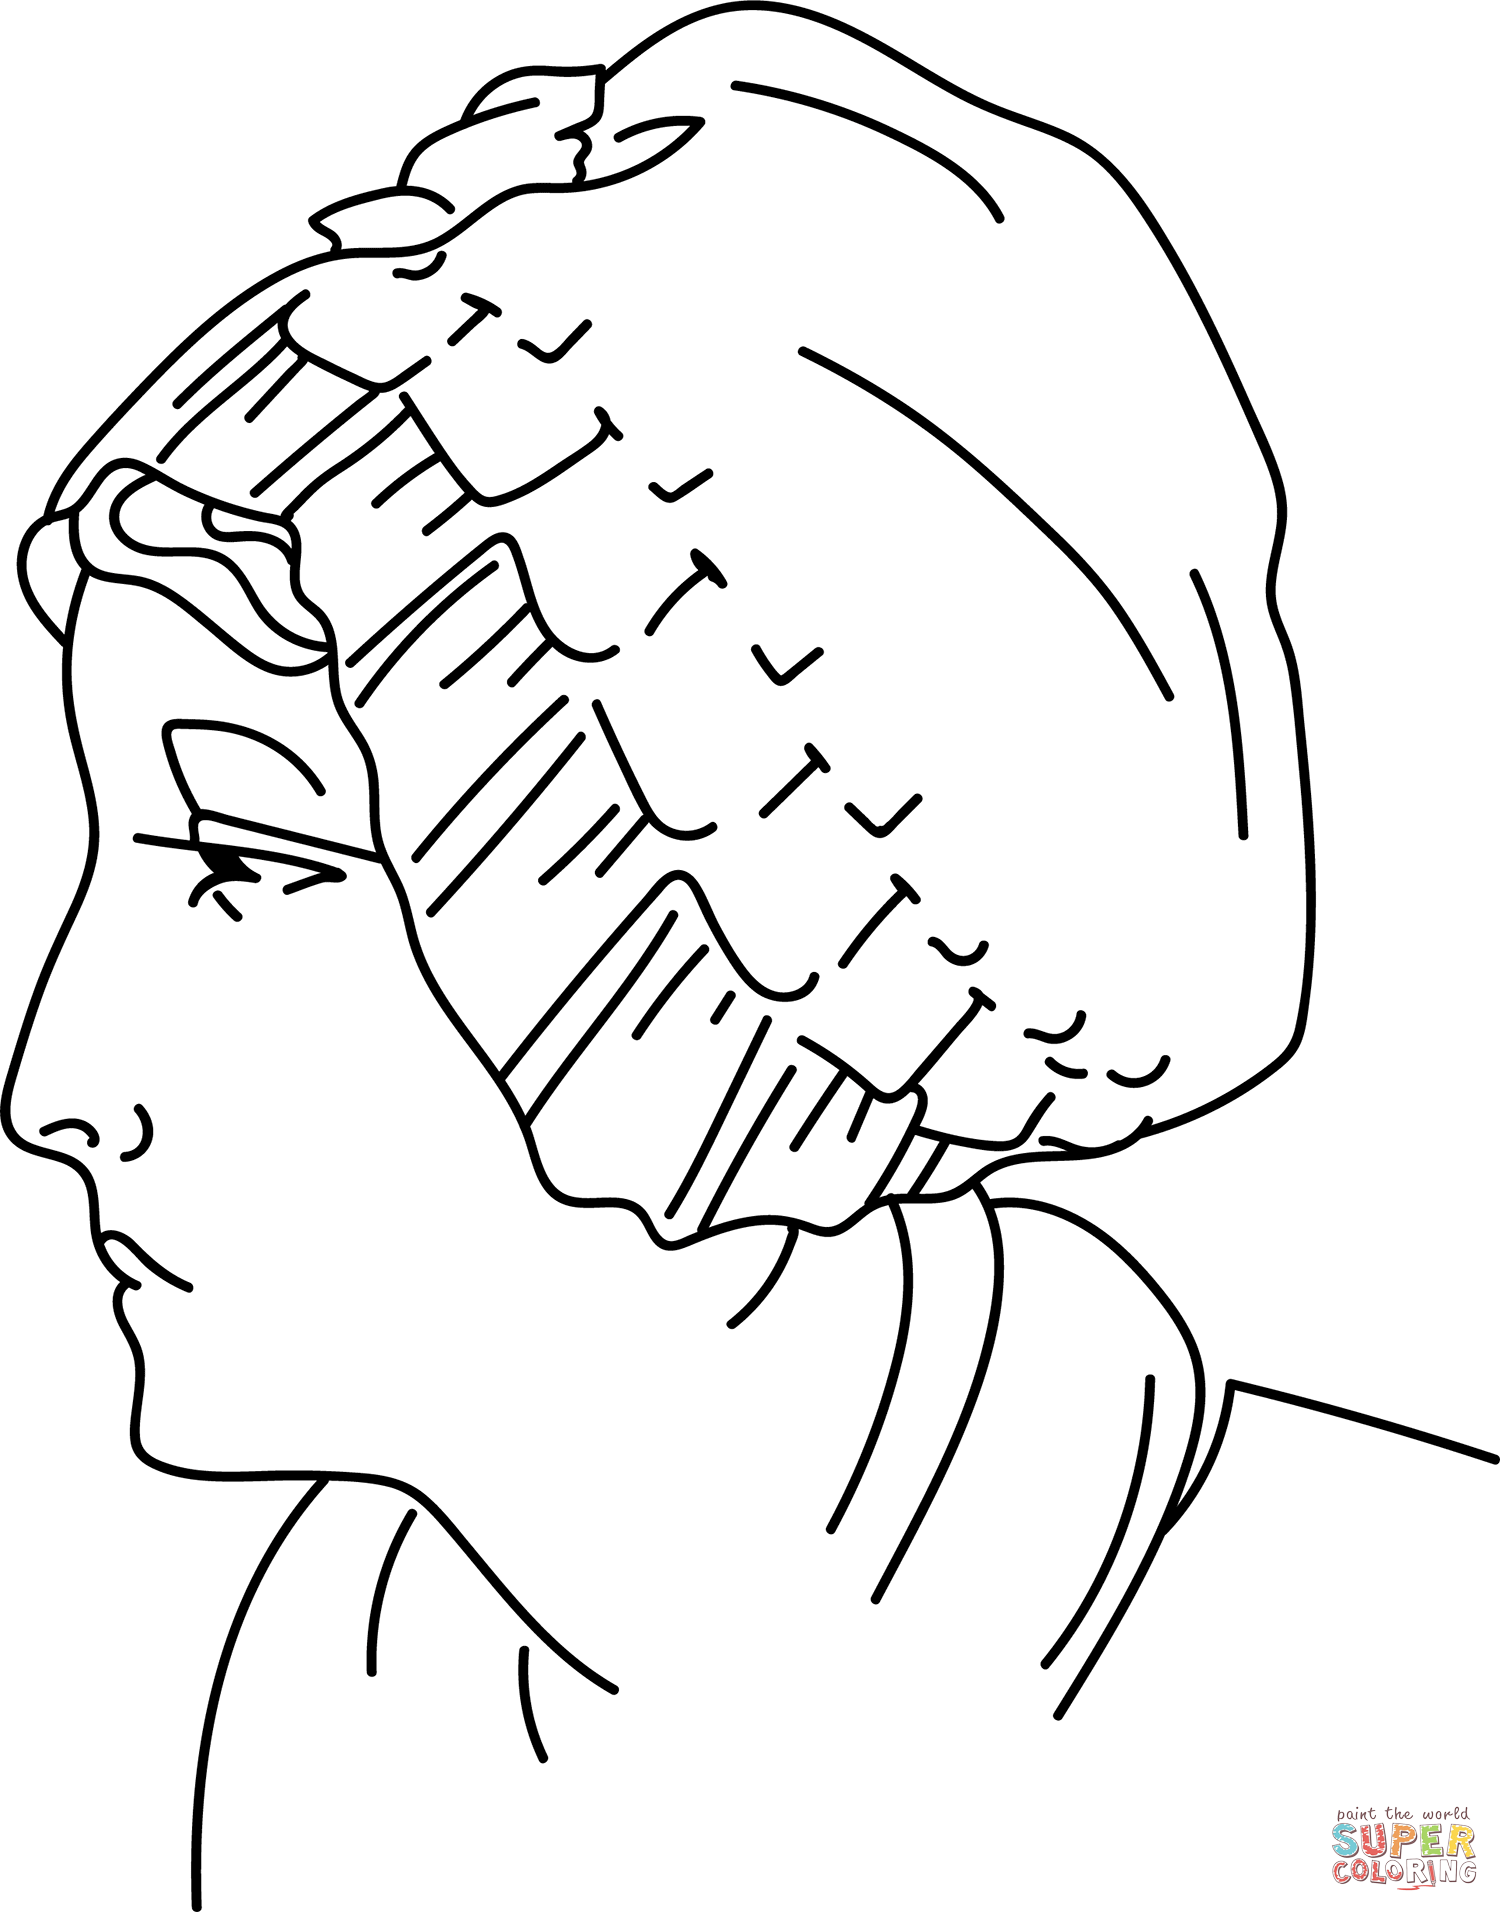 White bonnet coloring page free printable coloring pages